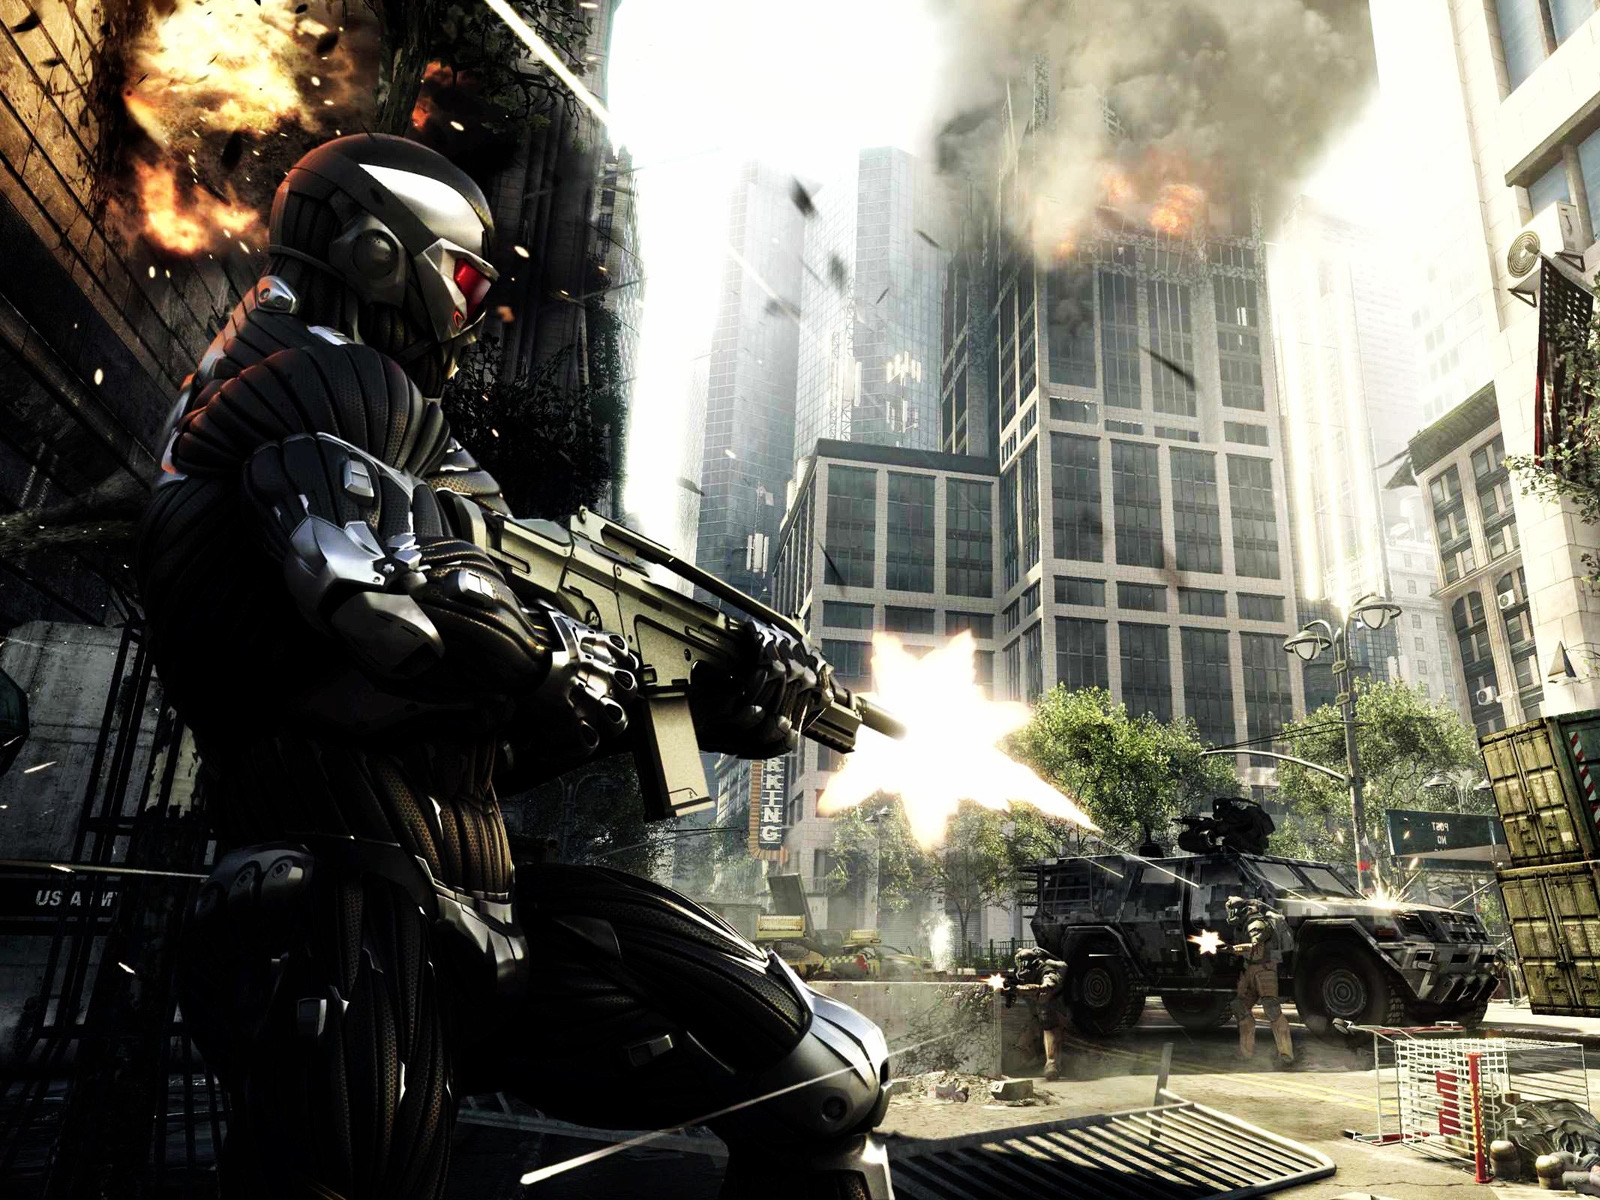 Crysis 2 Scene for 1600 x 1200 resolution